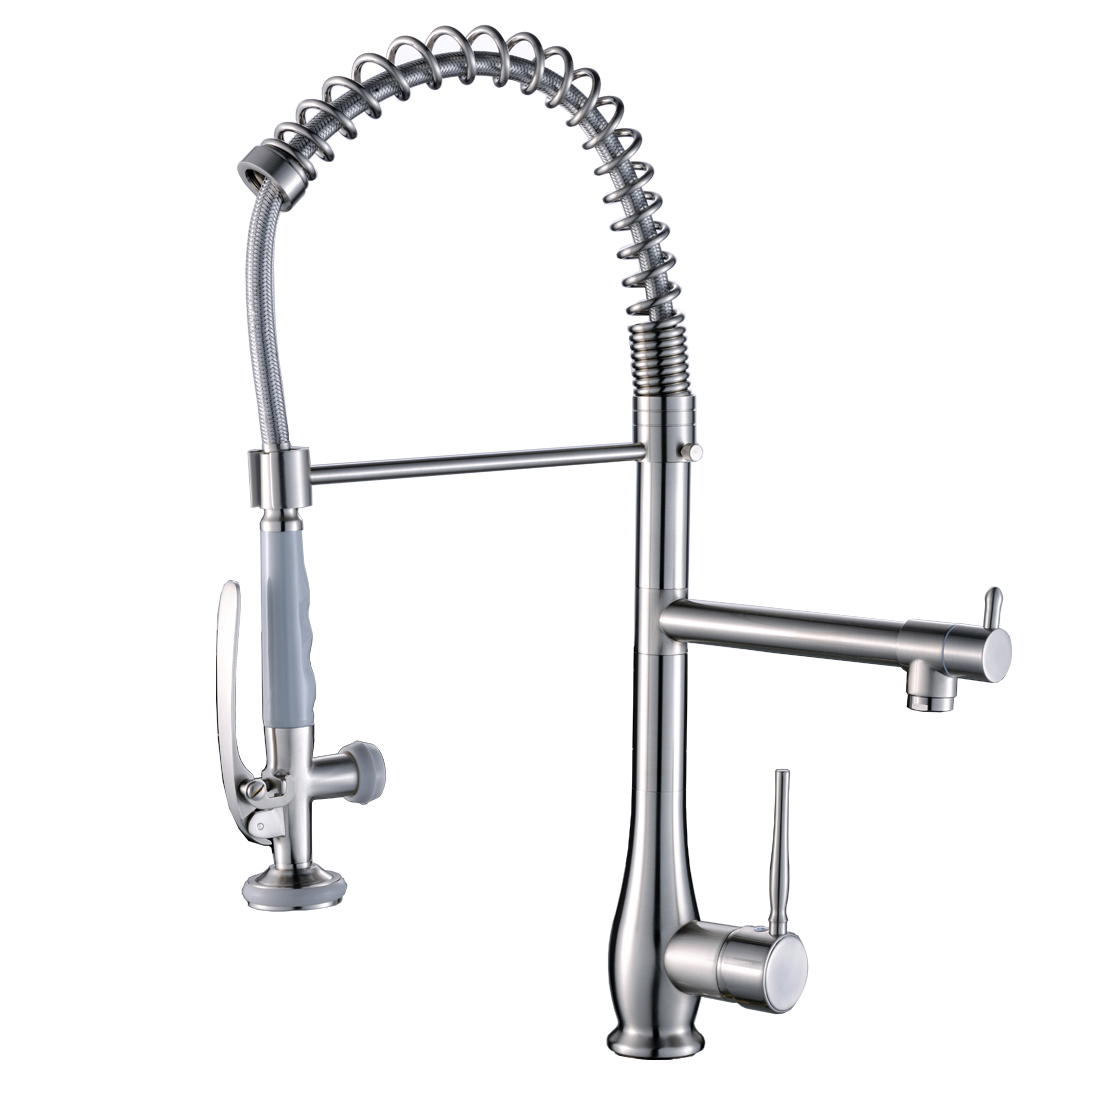 Brushed Nickel Kitchen Faucet with Pull Down Sprayer, Single Handle High Pressure Kitchen Sink Faucet, Commercial Double-Headed  Kitchen Faucets